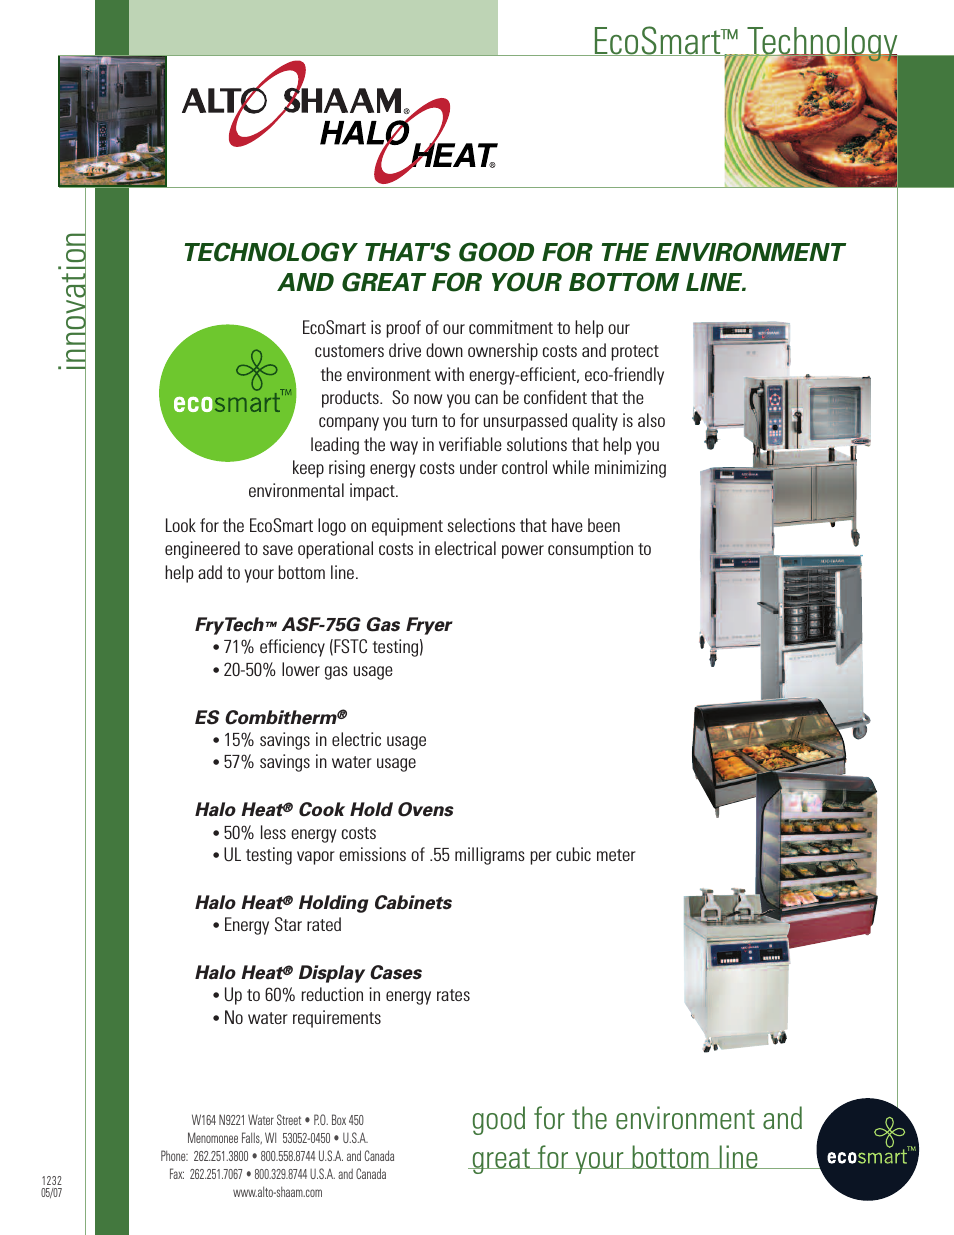 EcoSmart Cook and Hold Ovens